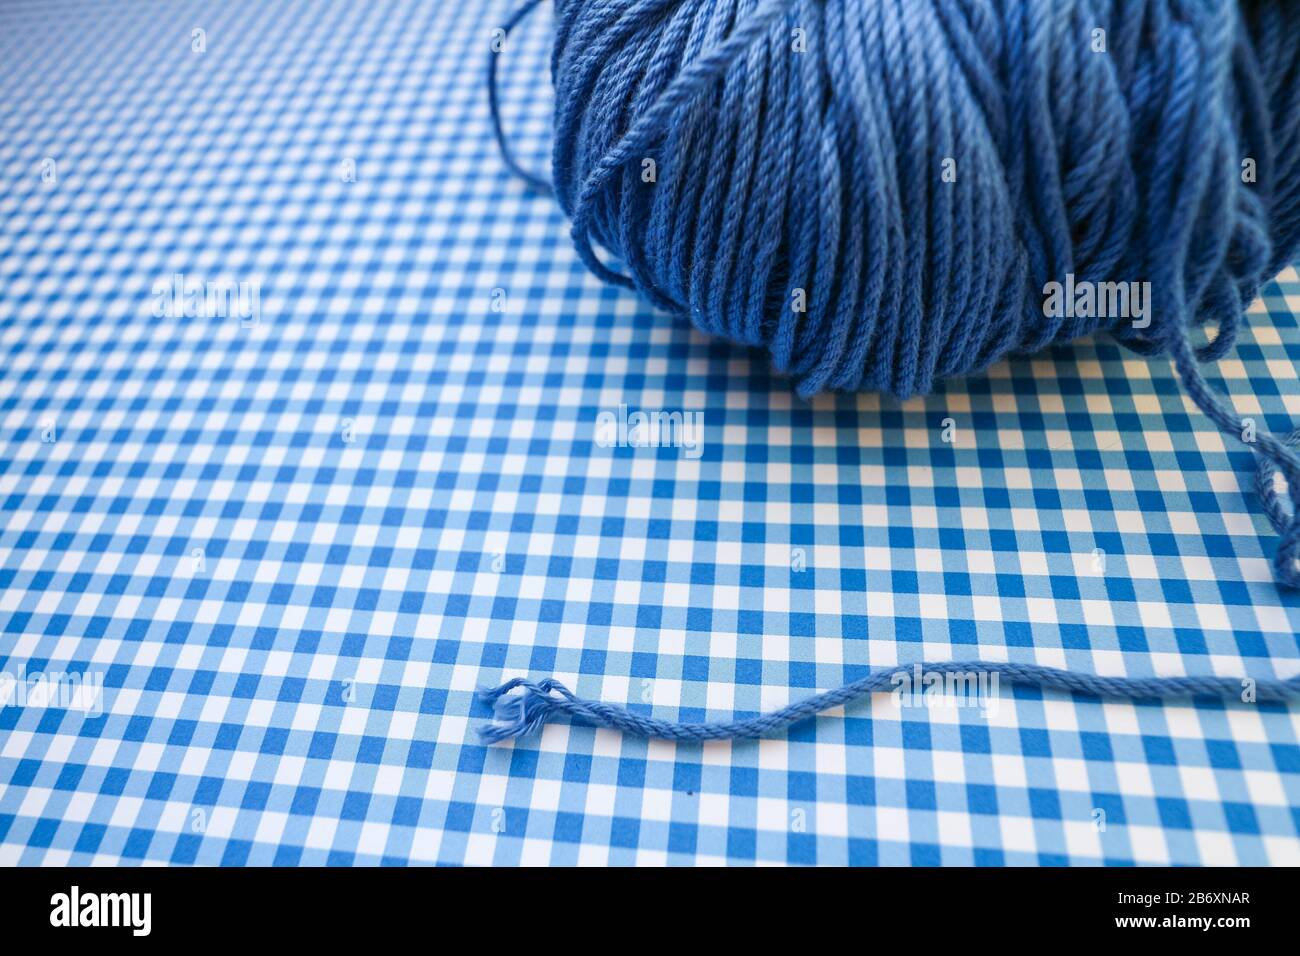 Blue yarn ball on a blue checkered background. Stock Photo